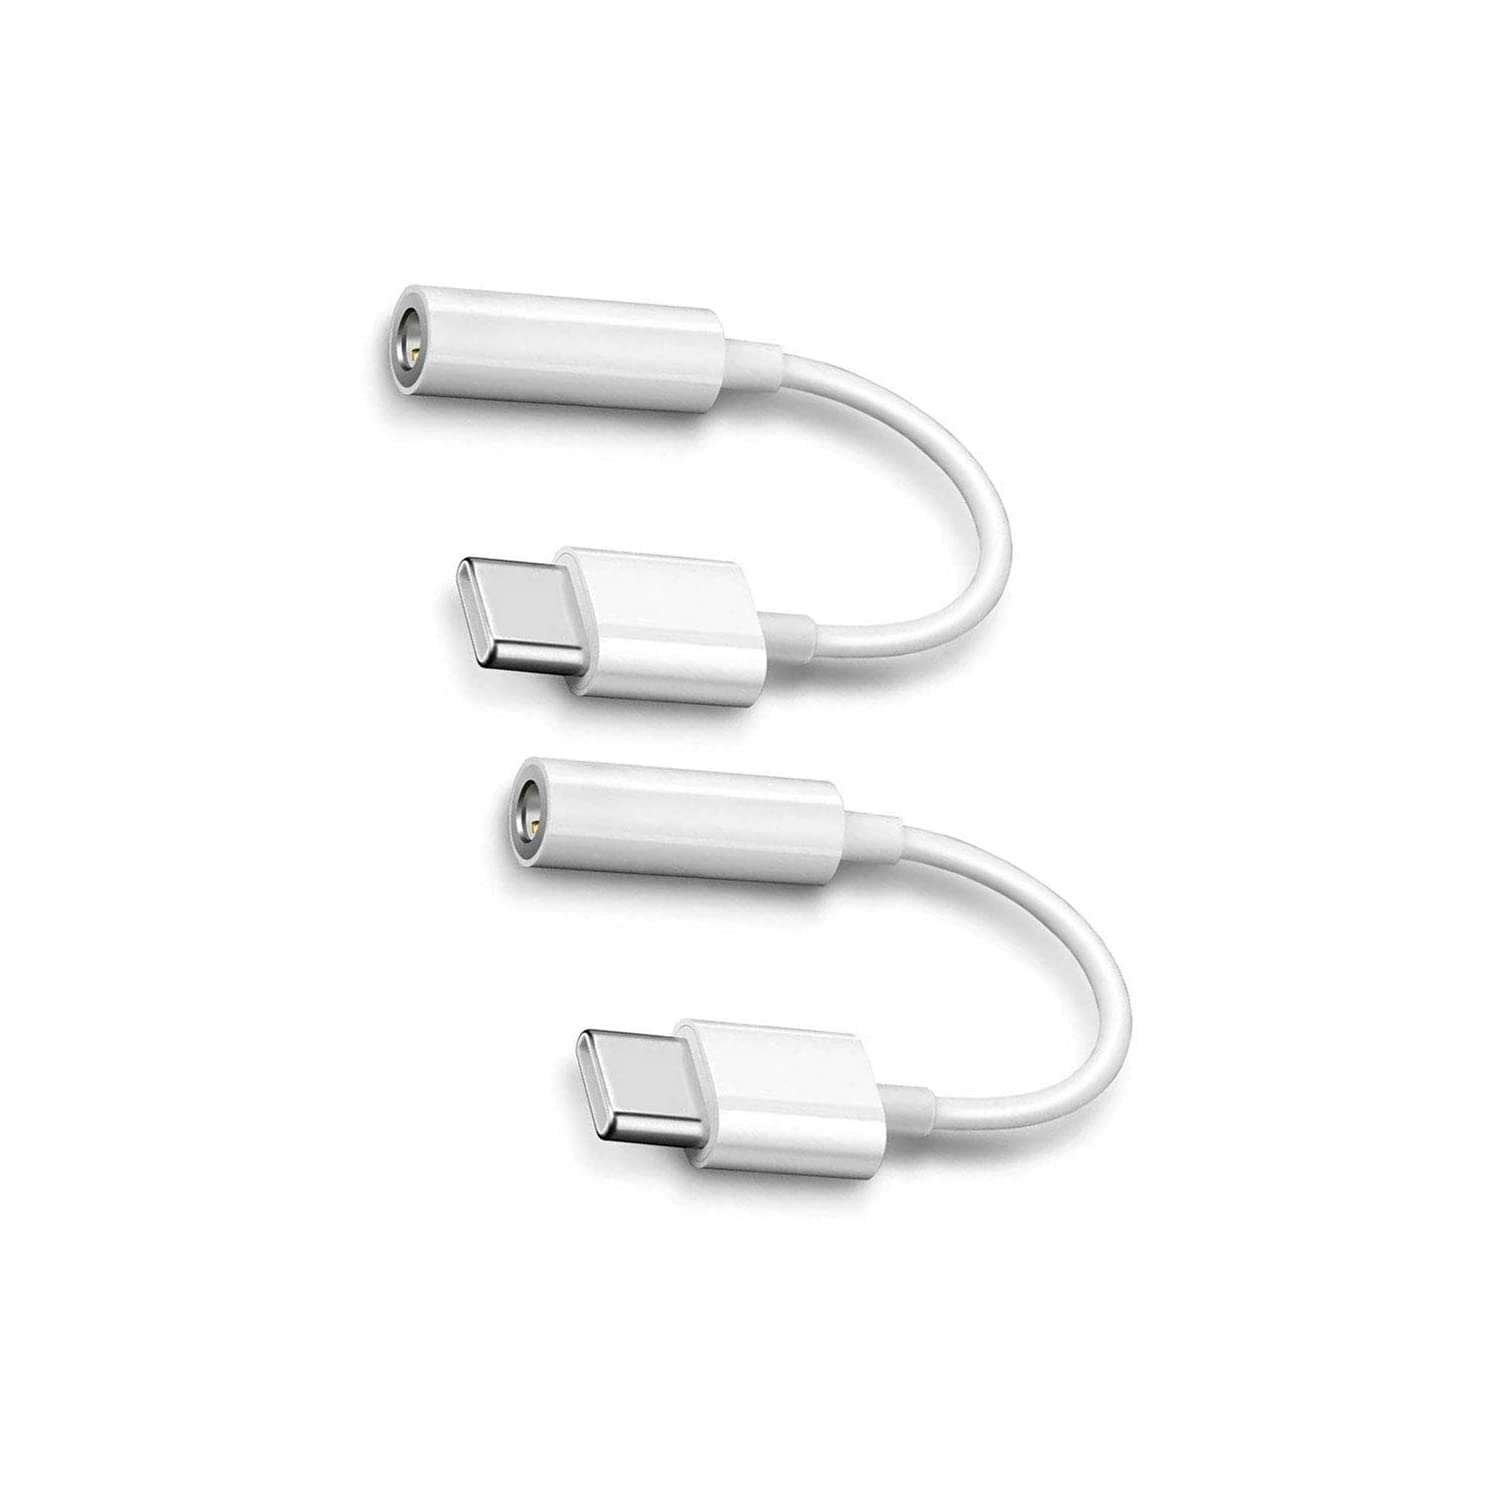 CABLESHARK for USB C to 3.5mm Headphone Jack Adapter, Upgrade USB Type C Audio Aux Adapter Converter Compatible with Pixel 3XL/2XL/3/2, iPad Pro 2018 Samsung Sony Galaxy Note Huawei and More (2 Pack)